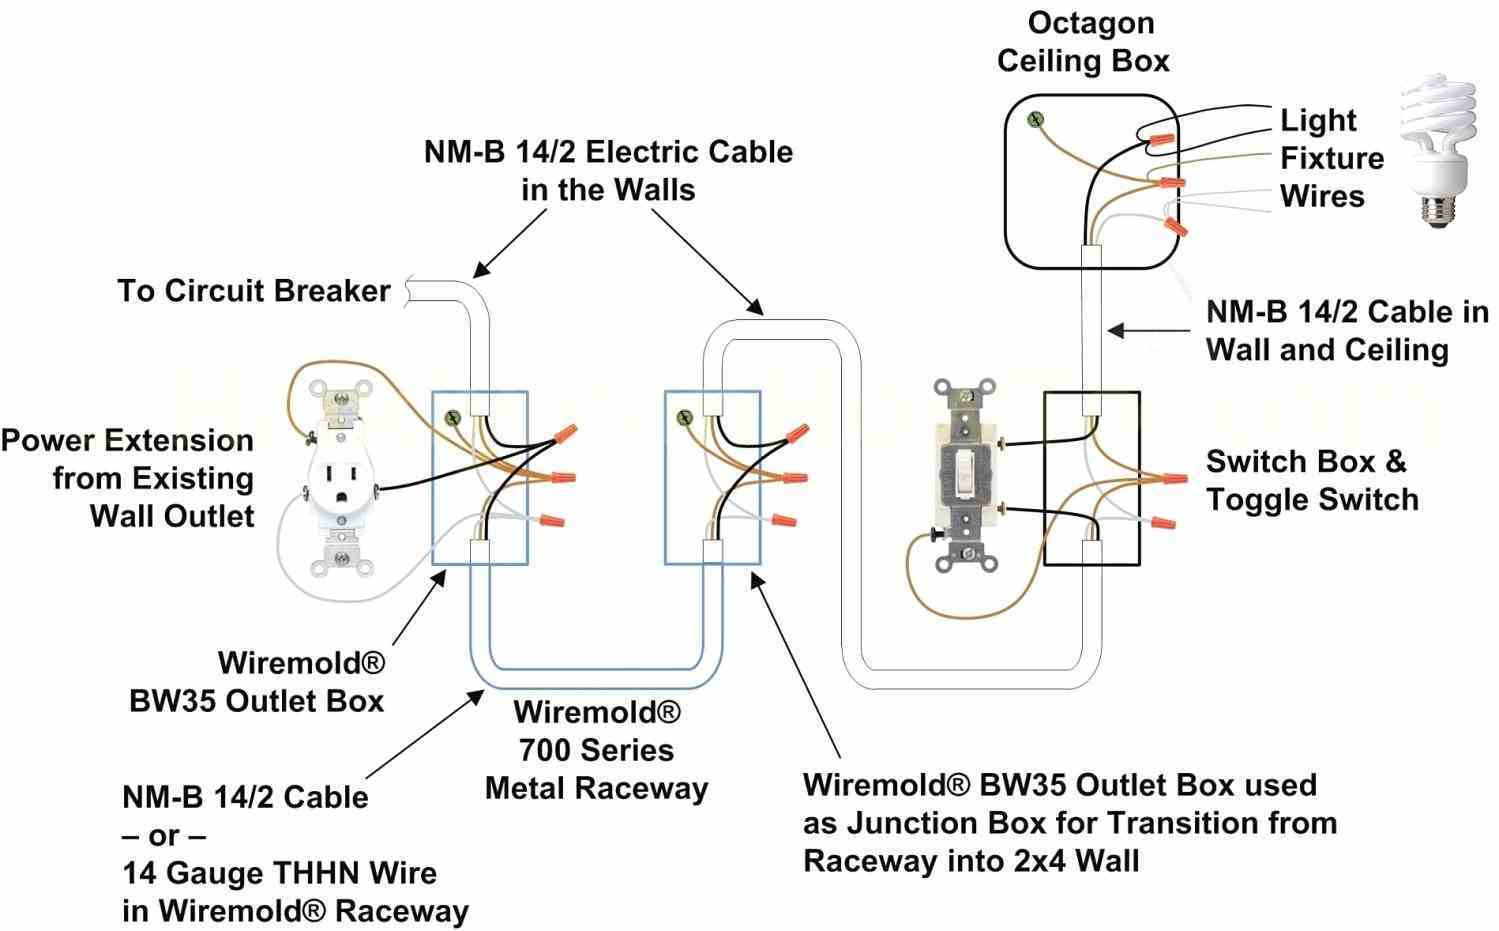 Wiring A Switched Outlet Wiring Diagram - Power To ...